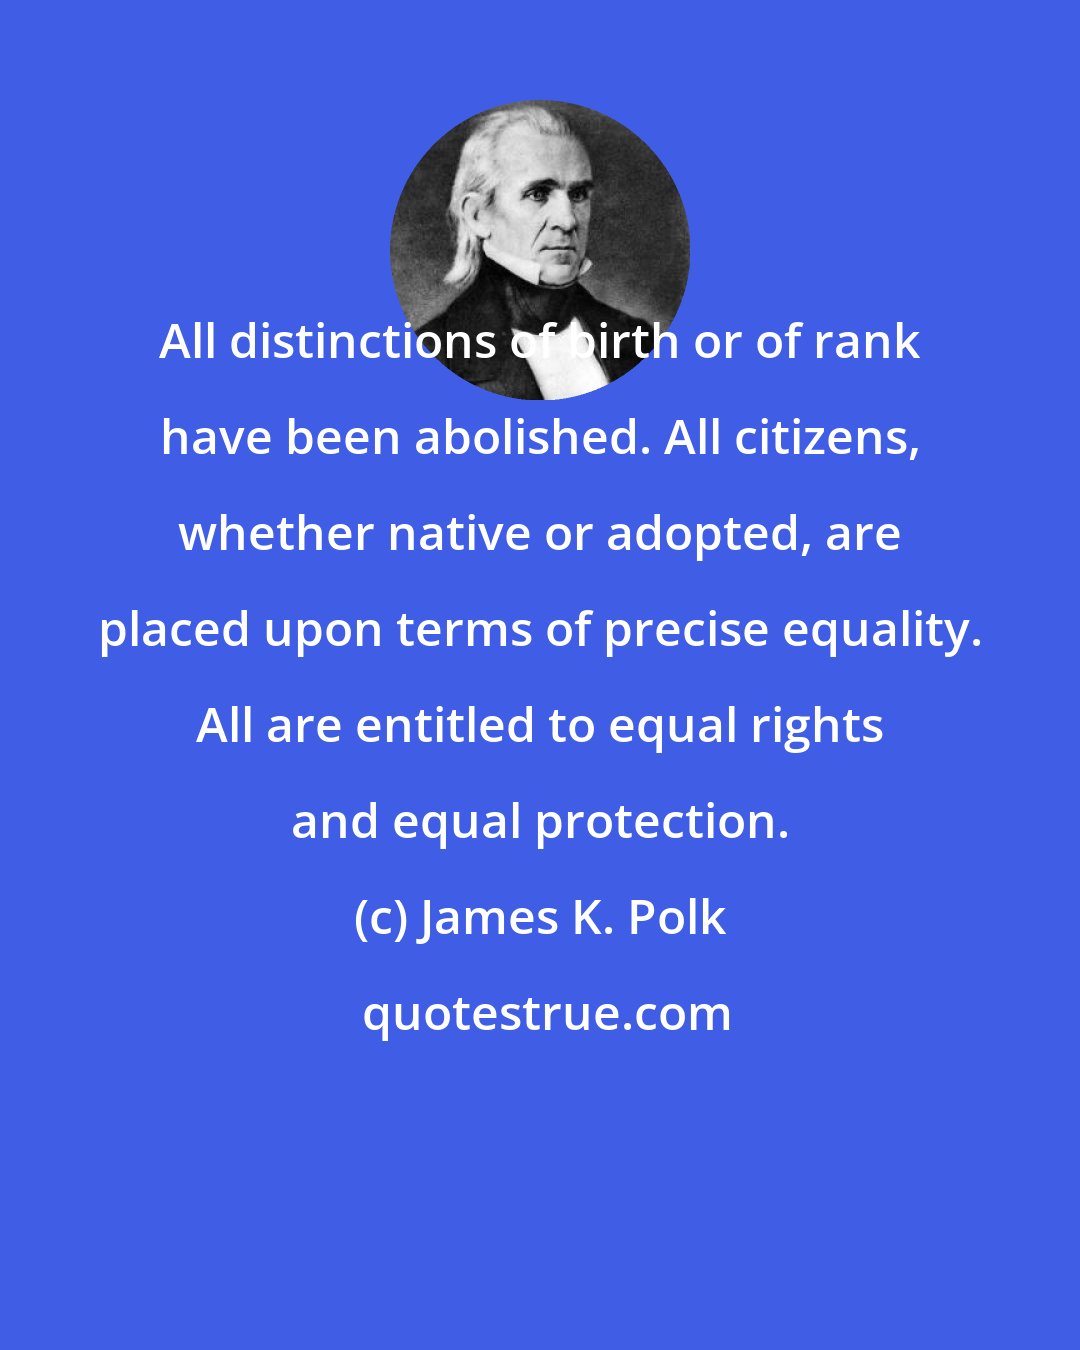 James K. Polk: All distinctions of birth or of rank have been abolished. All citizens, whether native or adopted, are placed upon terms of precise equality. All are entitled to equal rights and equal protection.